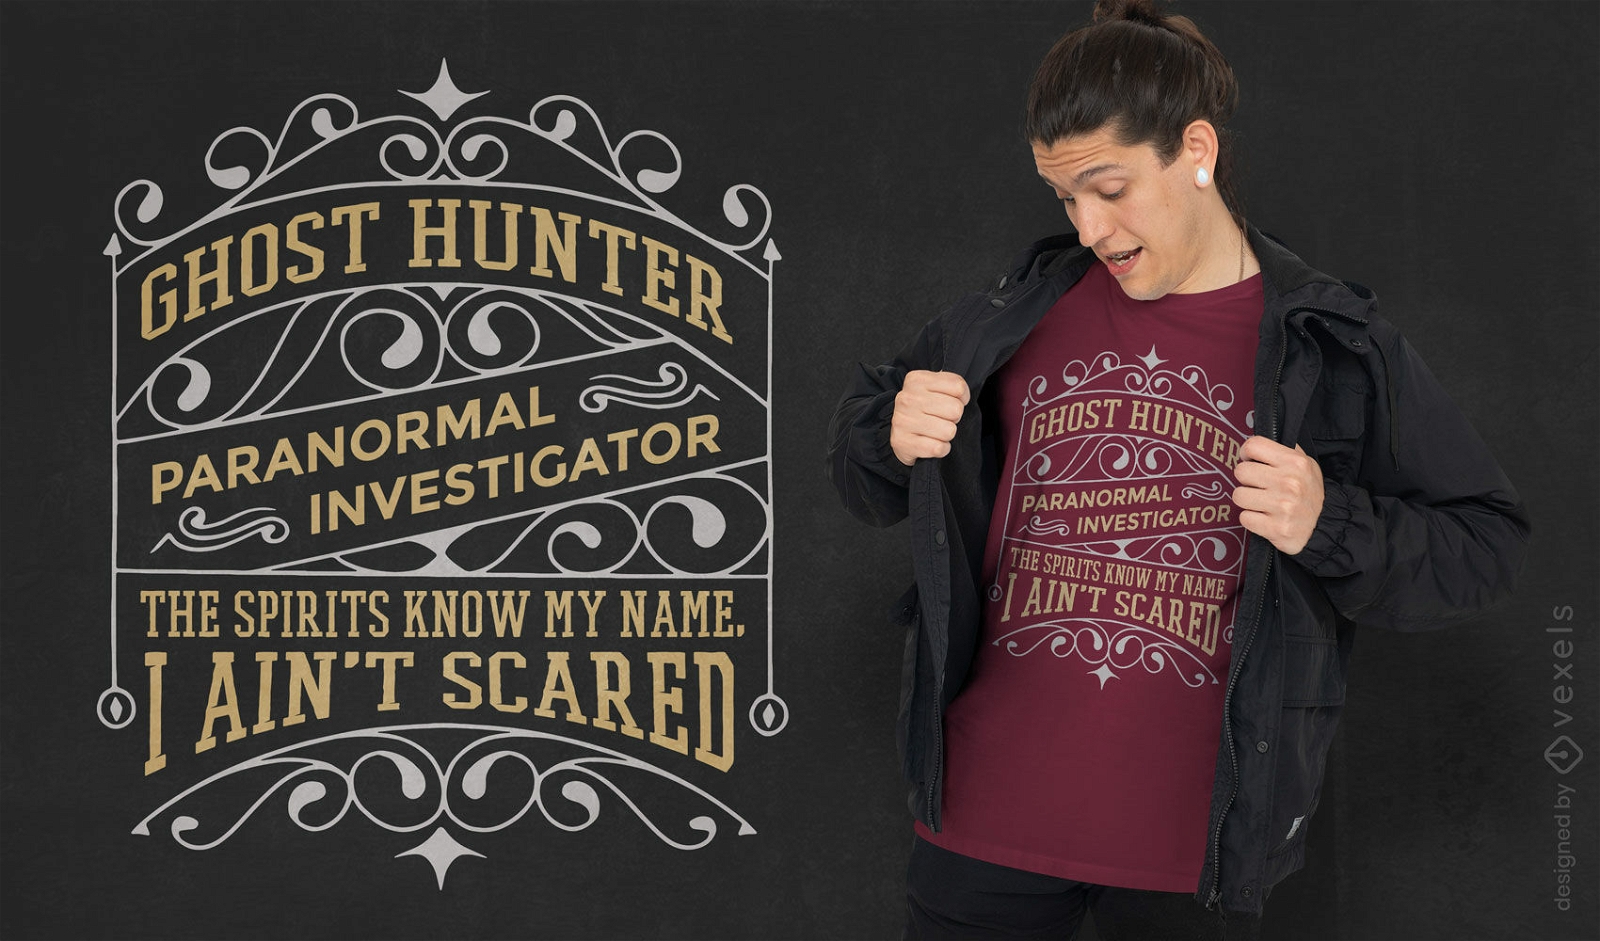 Ghost hunter quote t-shirt design